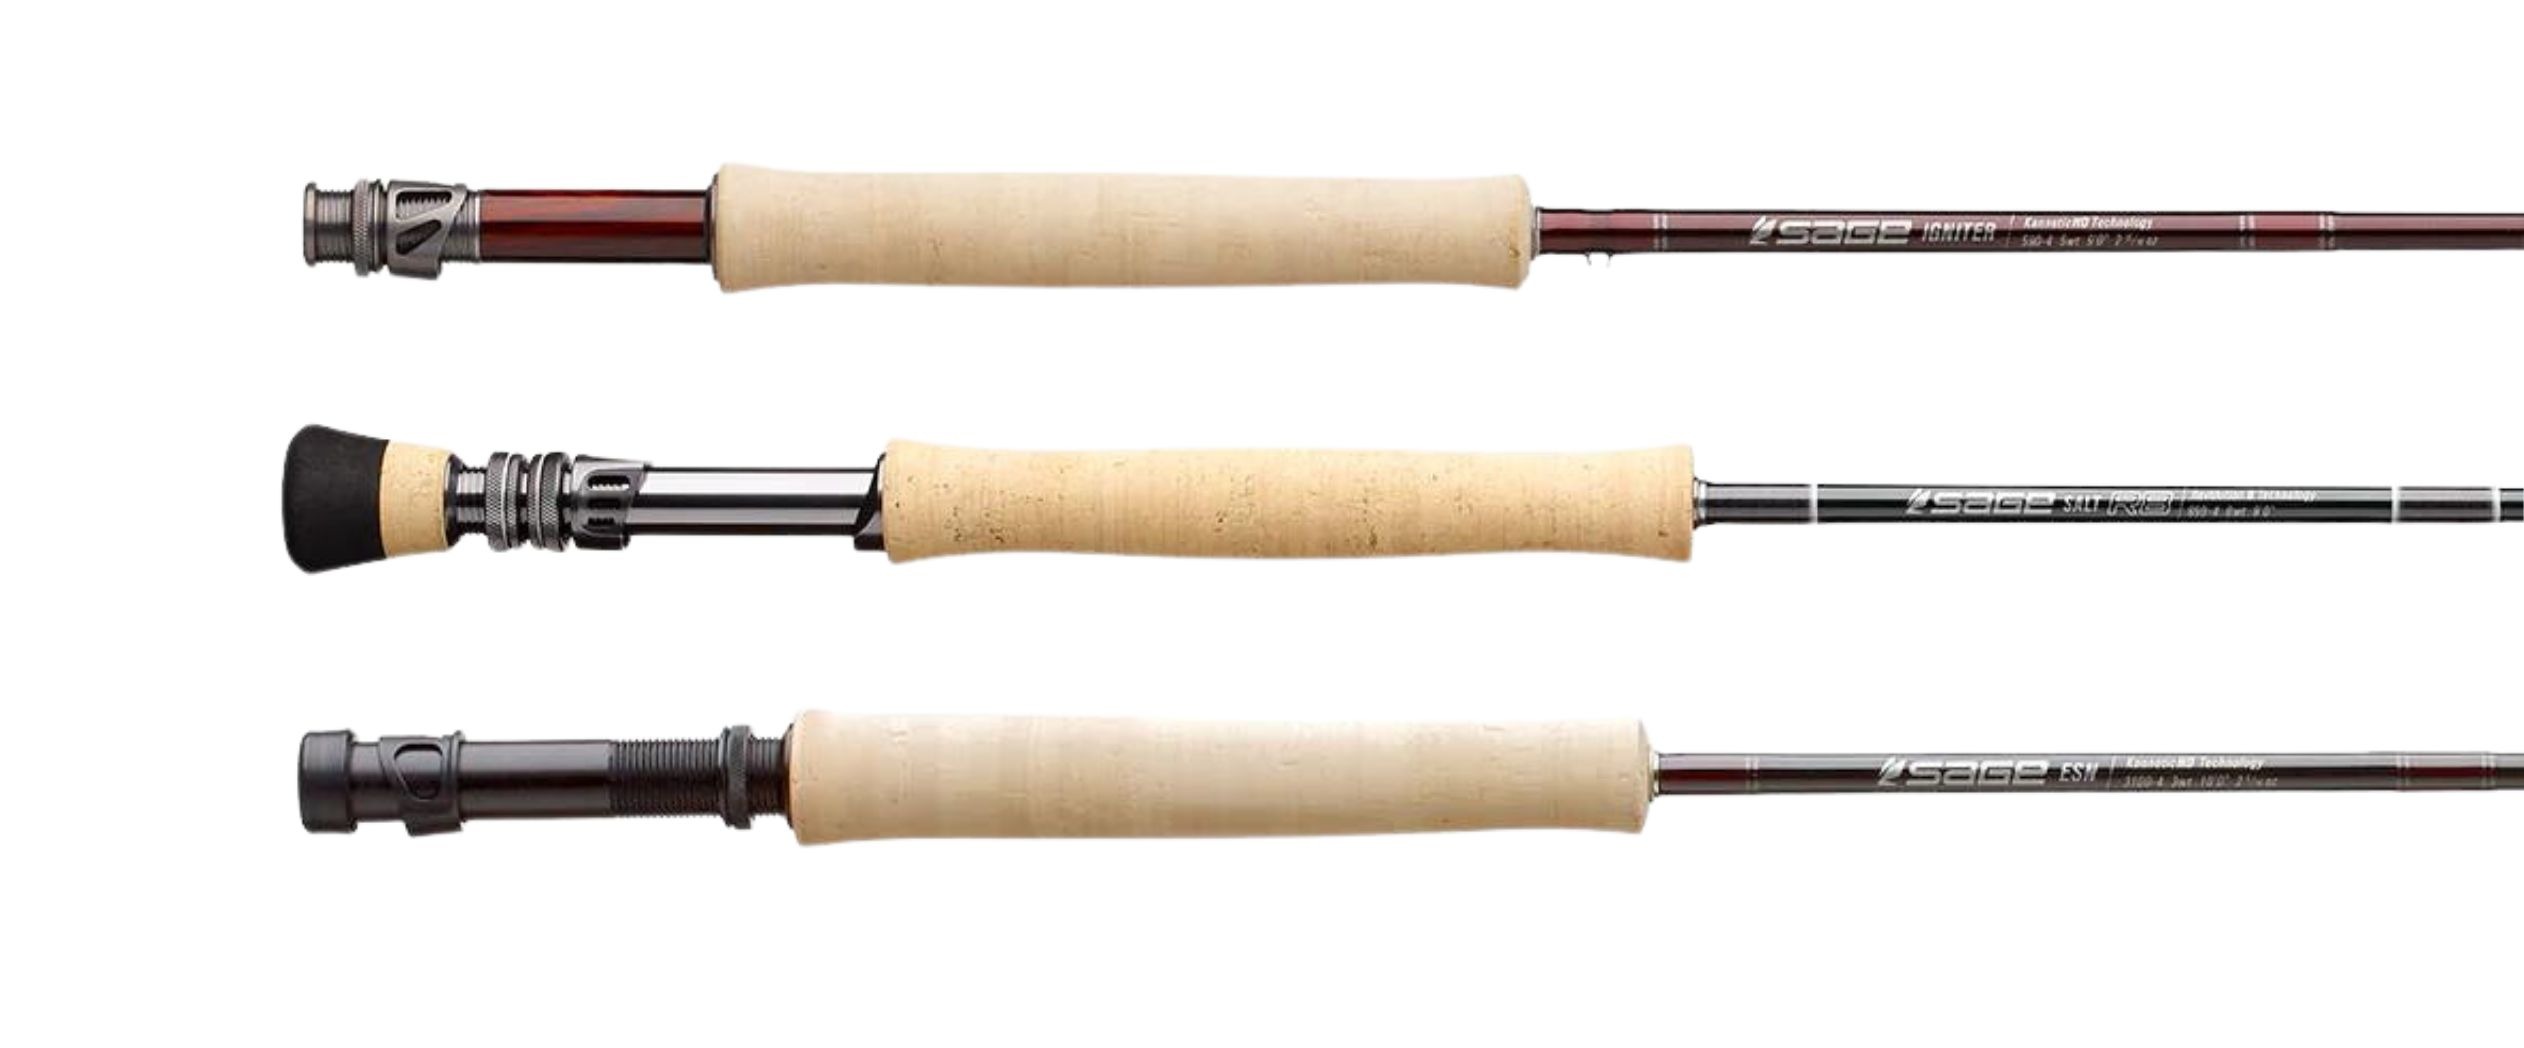 Sage Trout Spey G5 Fly Rod - 11' 3wt